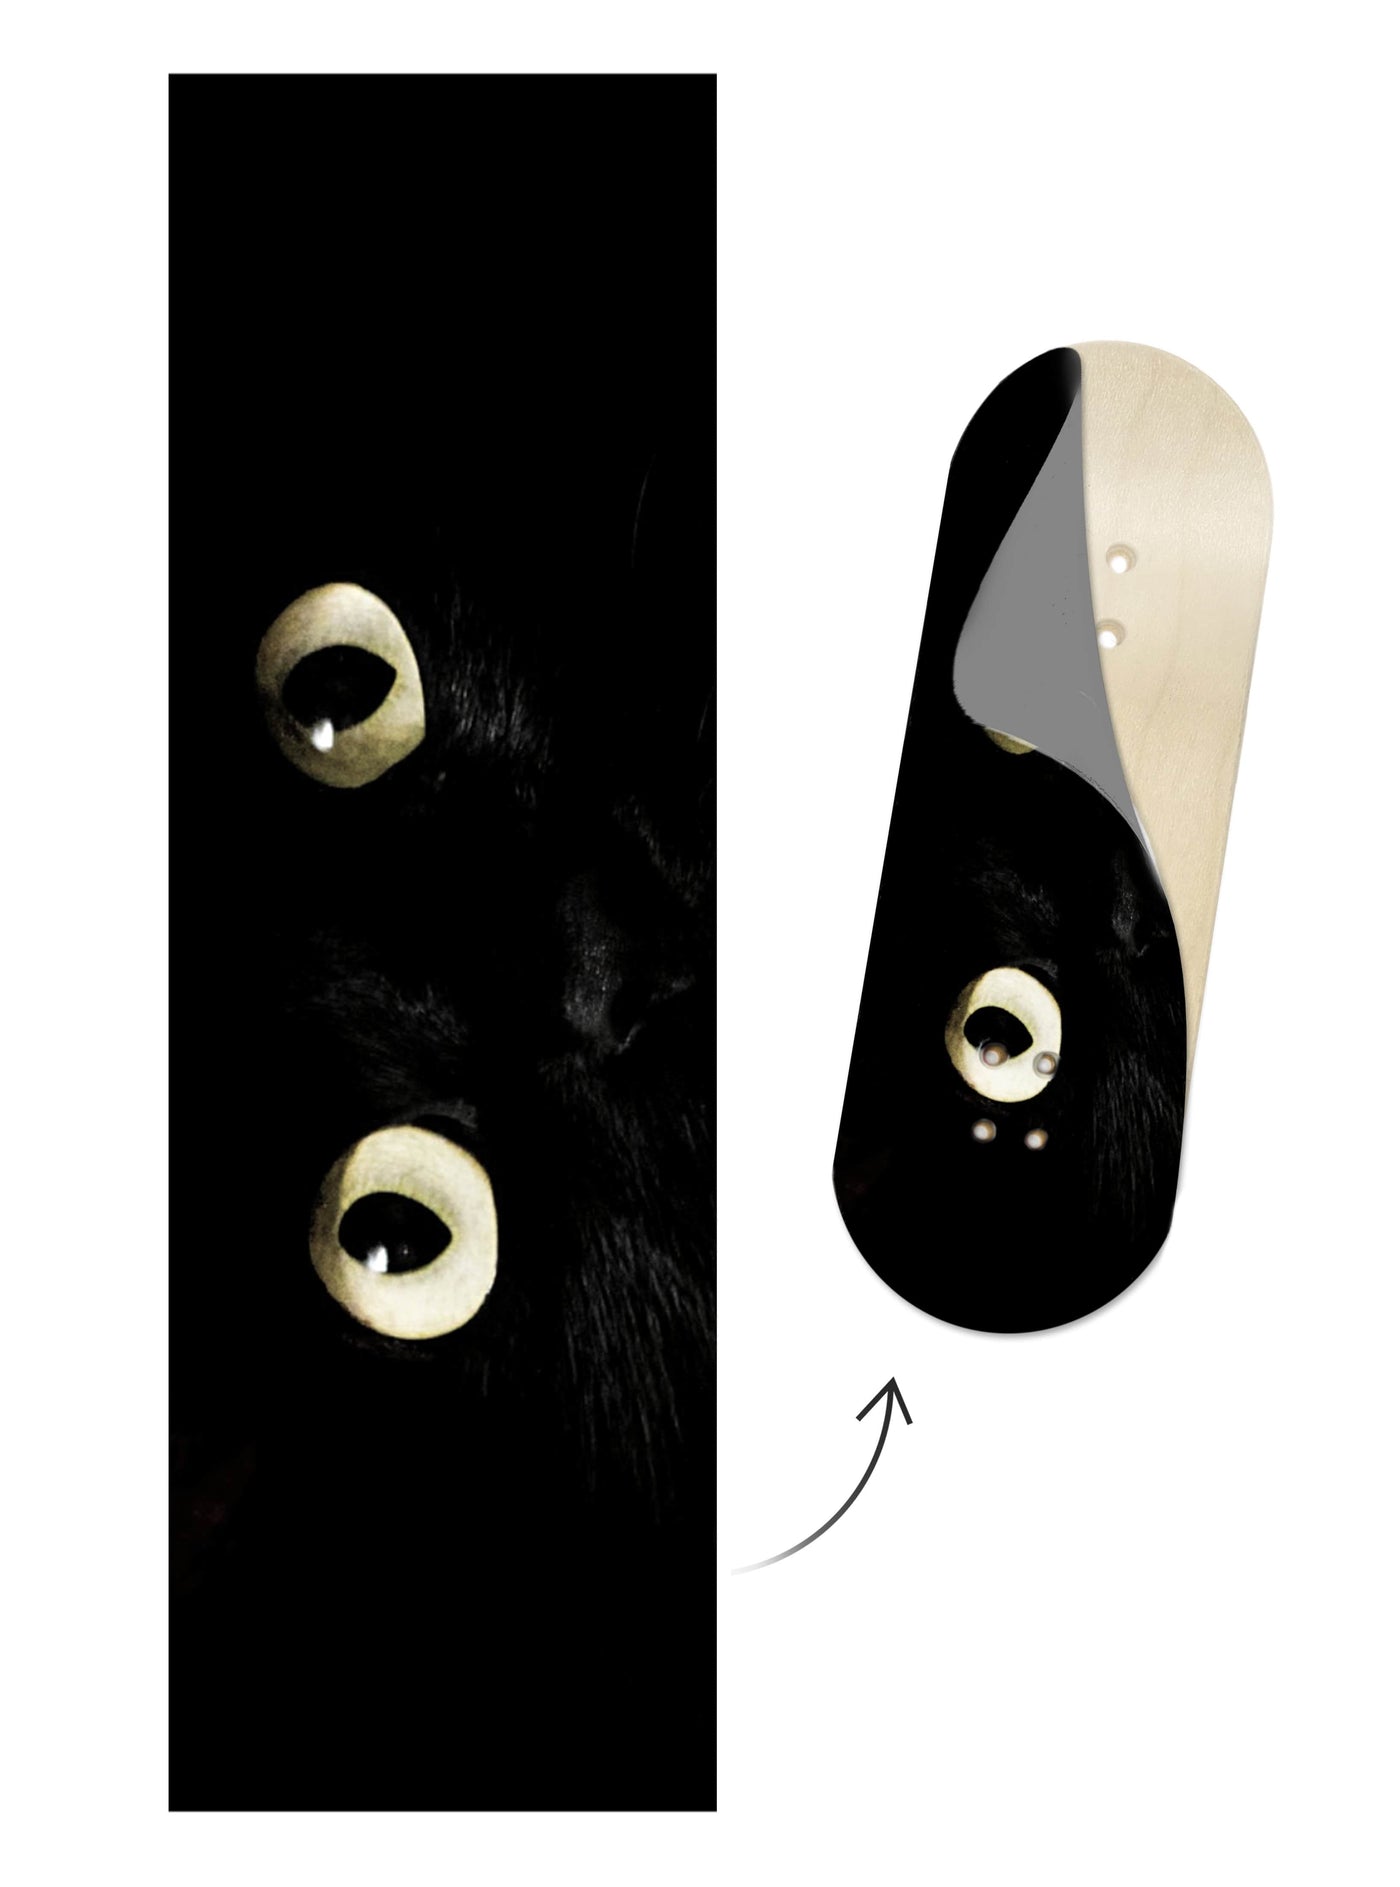 Teak Tuning Limited Edition "Midnight Stare" Deck Graphic Wrap - 35mm x 110mm